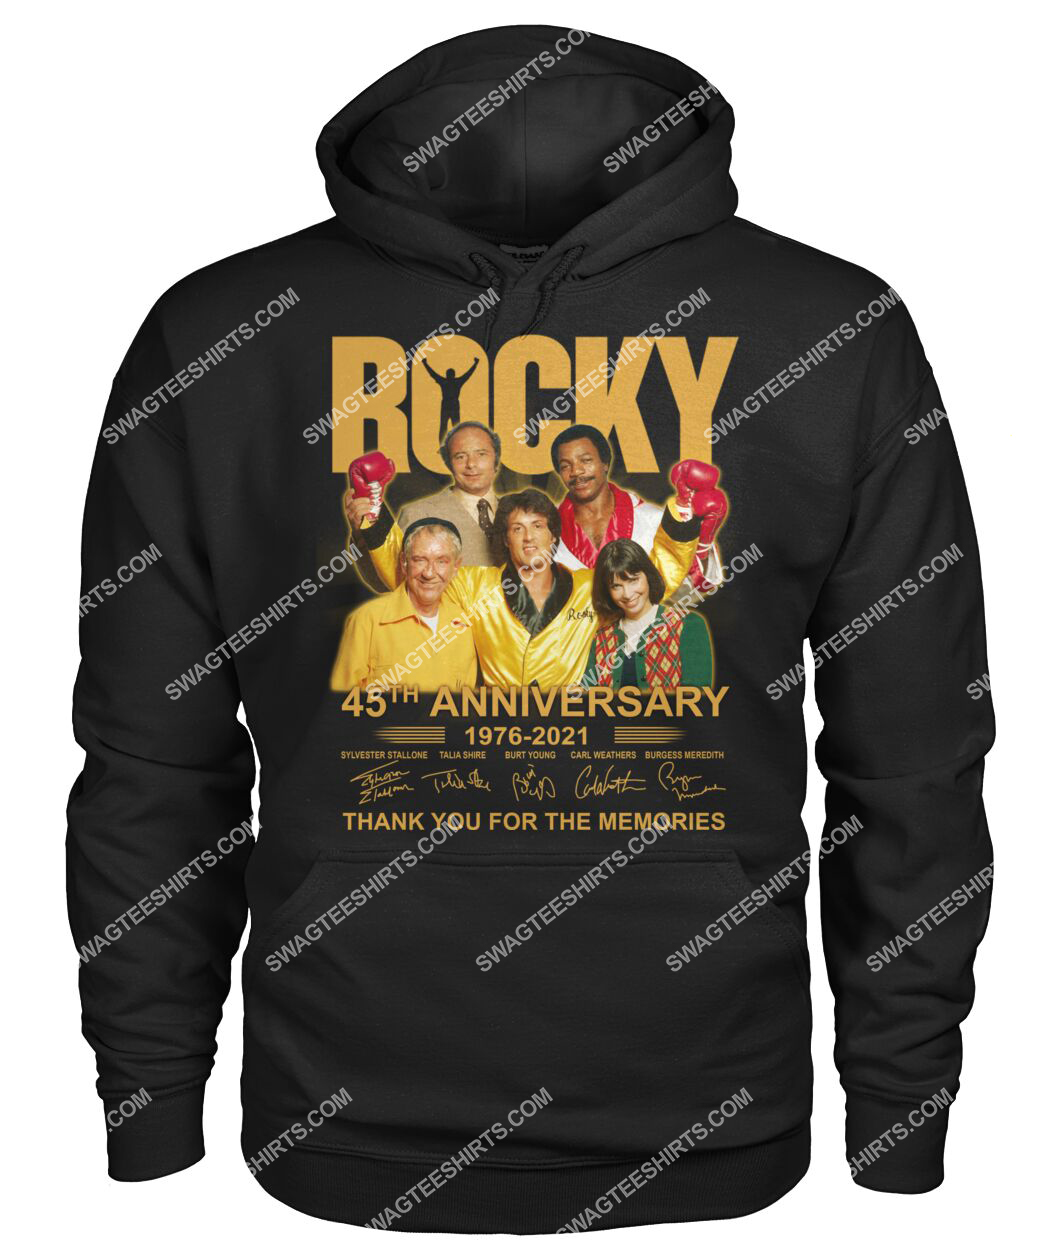 rocky 45th anniversary 1976 – 2021 signatures thank you for the memories hoodie 1